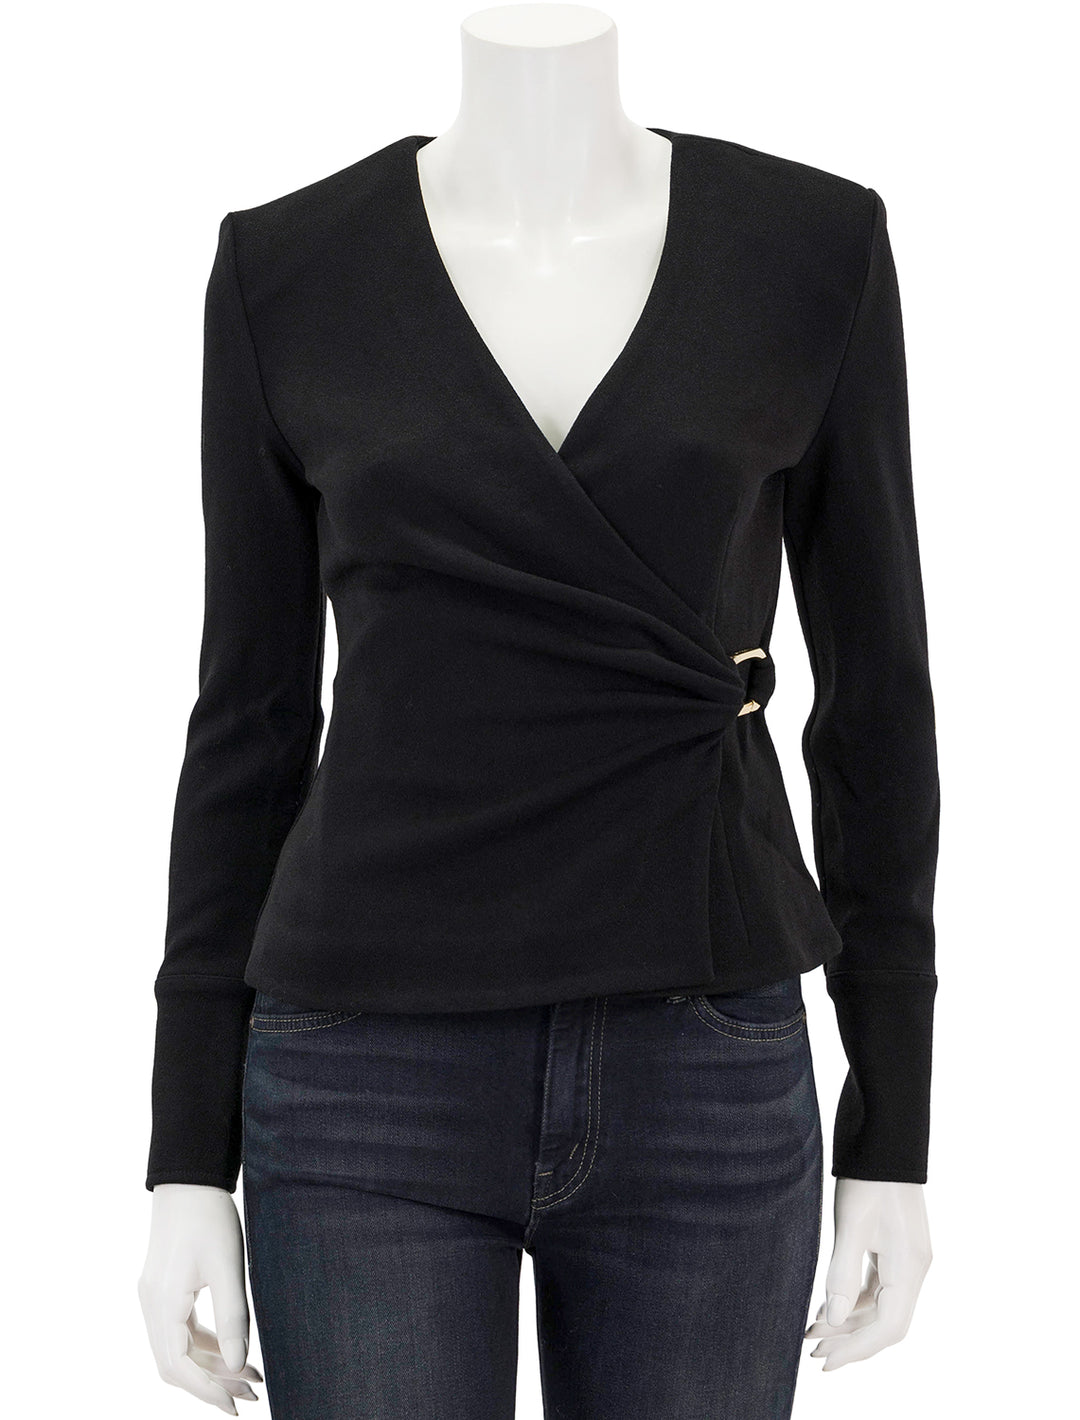 Front view of Anine Bing's joey top in black.